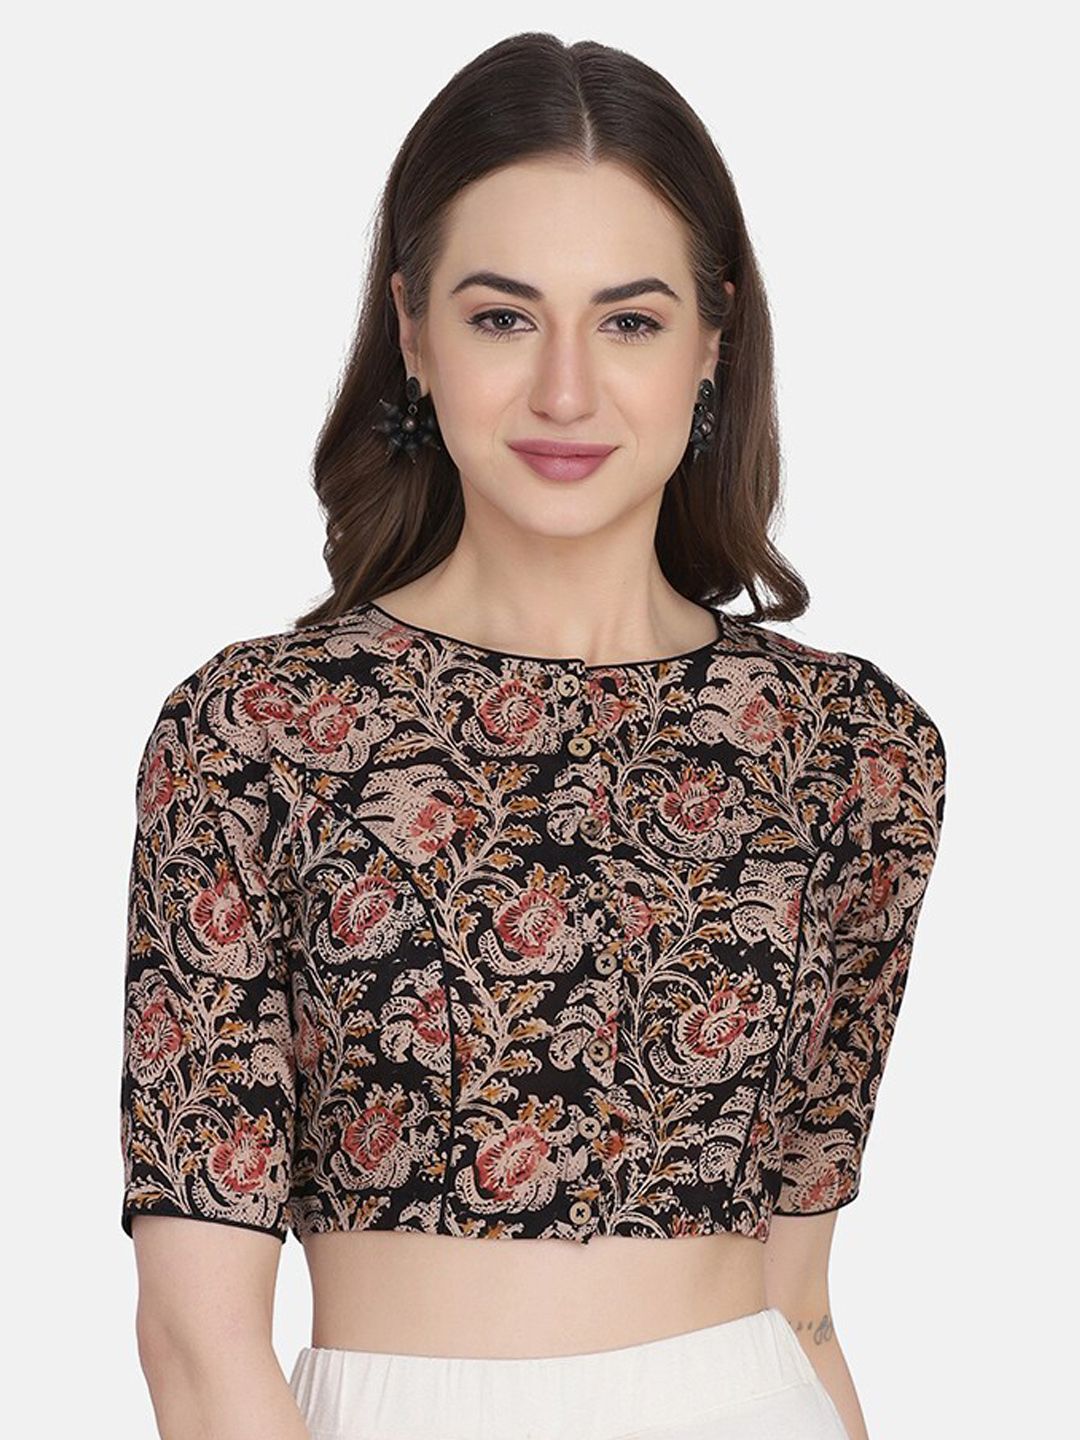 THE WEAVE TRAVELLER Women Black Printed Pure Cotton Readymade Saree Blouse Price in India